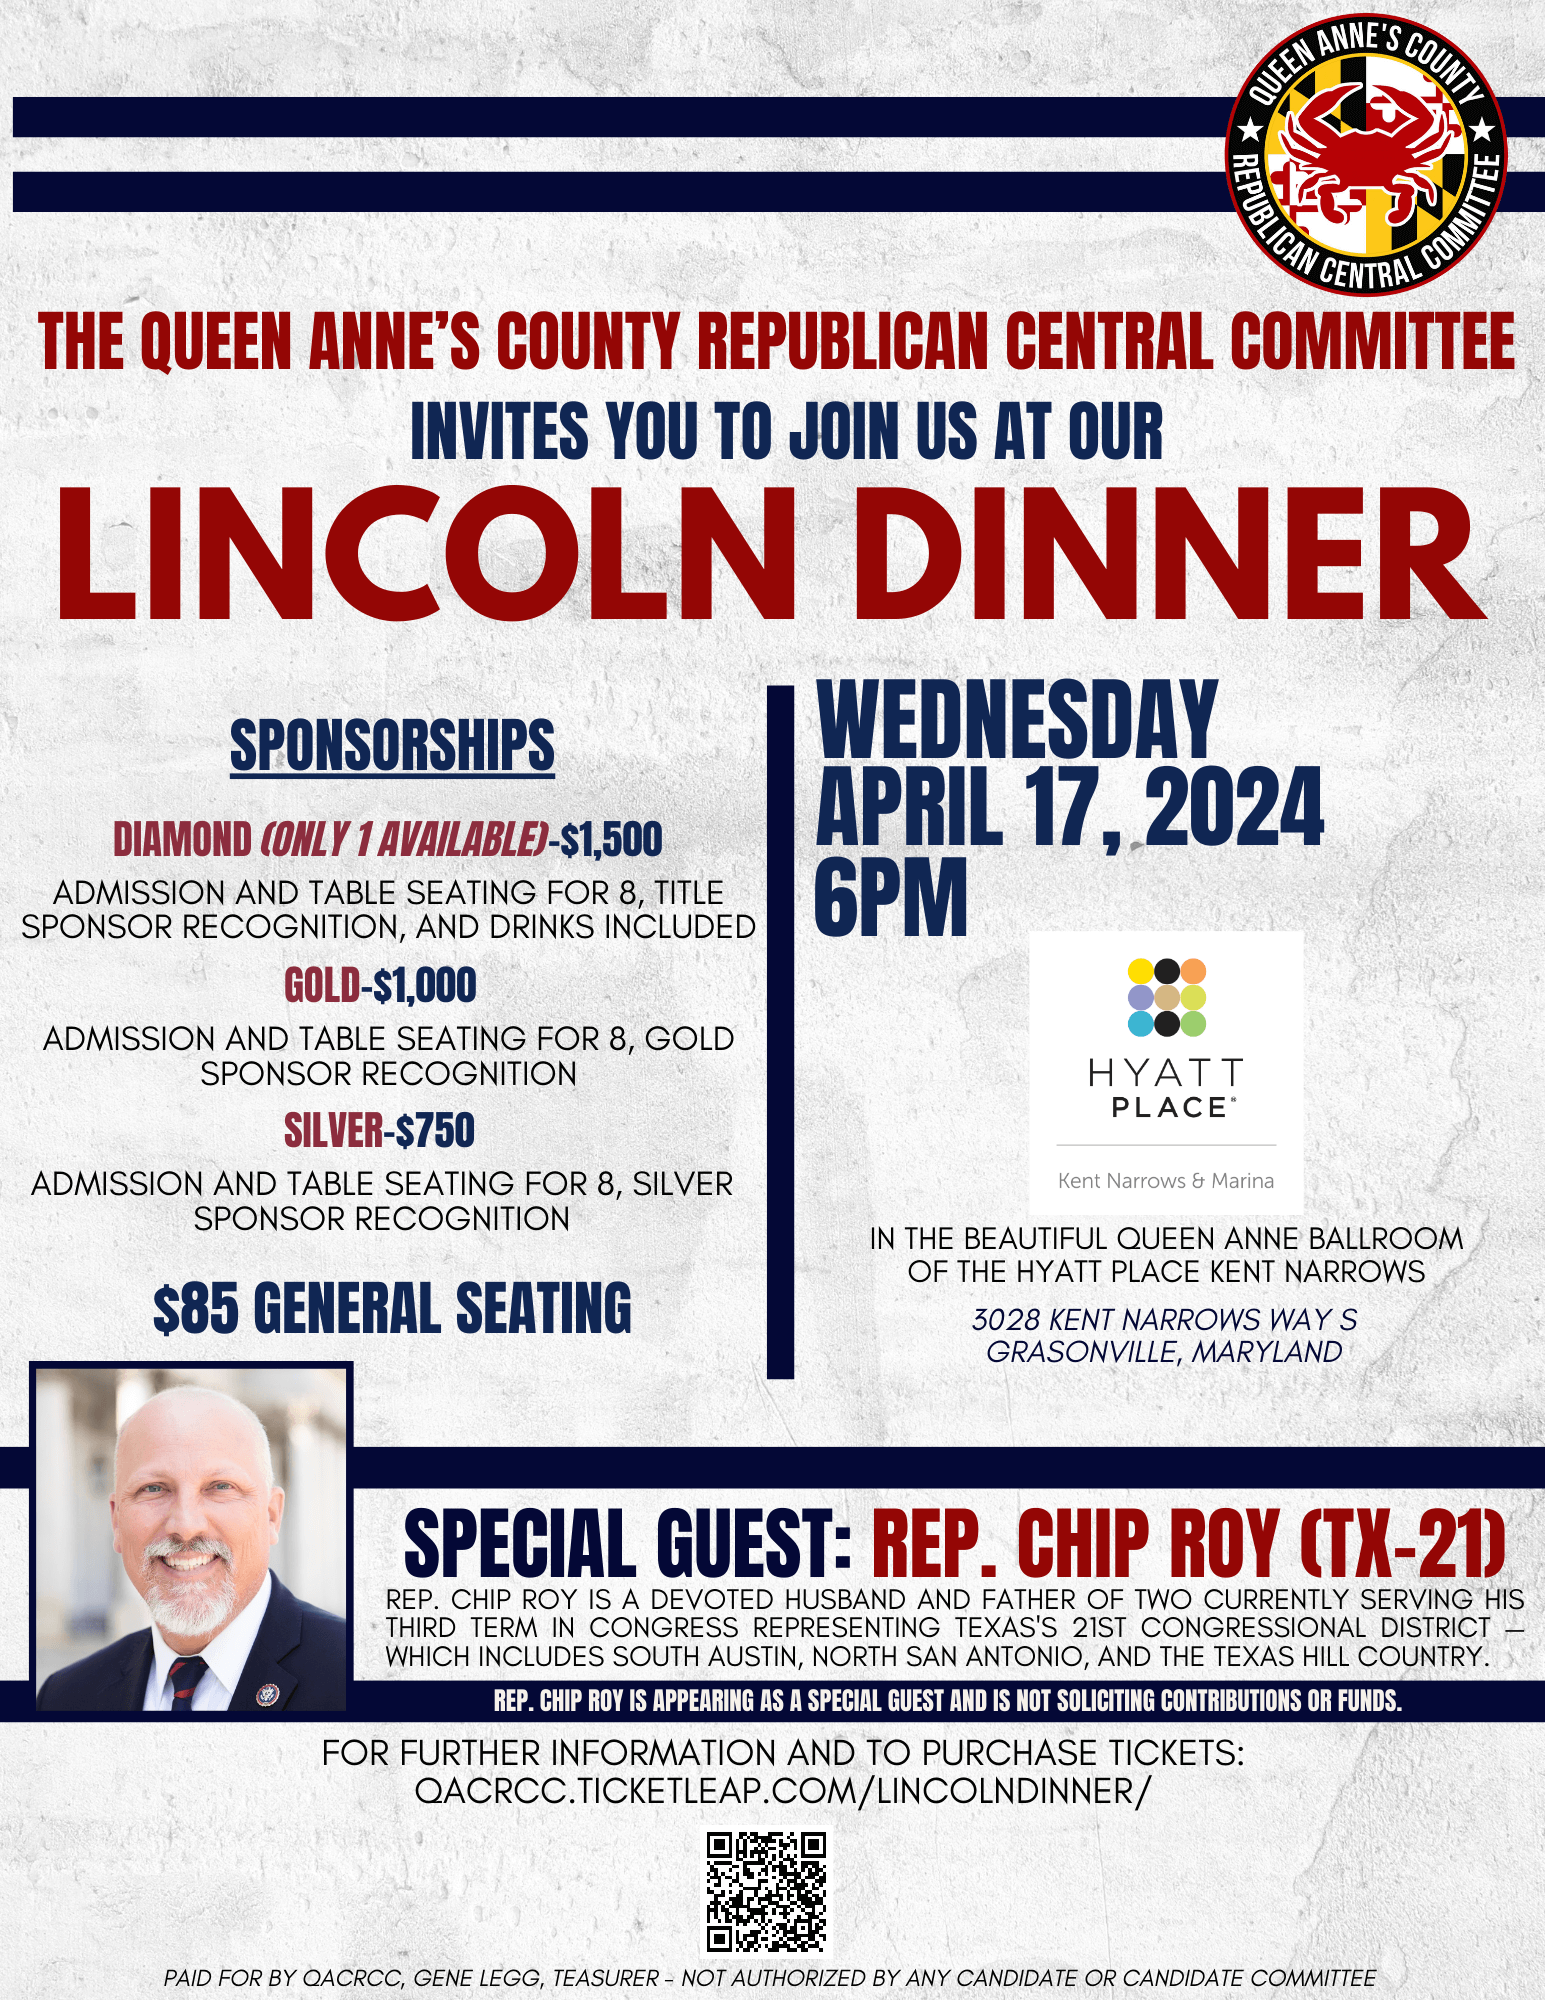 2024 Queen Anne’s County Republican Central Committee Lincoln Dinner HYATT PLACE KENT NARROWS & MARINA 3028 Kent Narrow Way S, Grasonville, MD 21638 GET YOUR TICKETS TODAY!